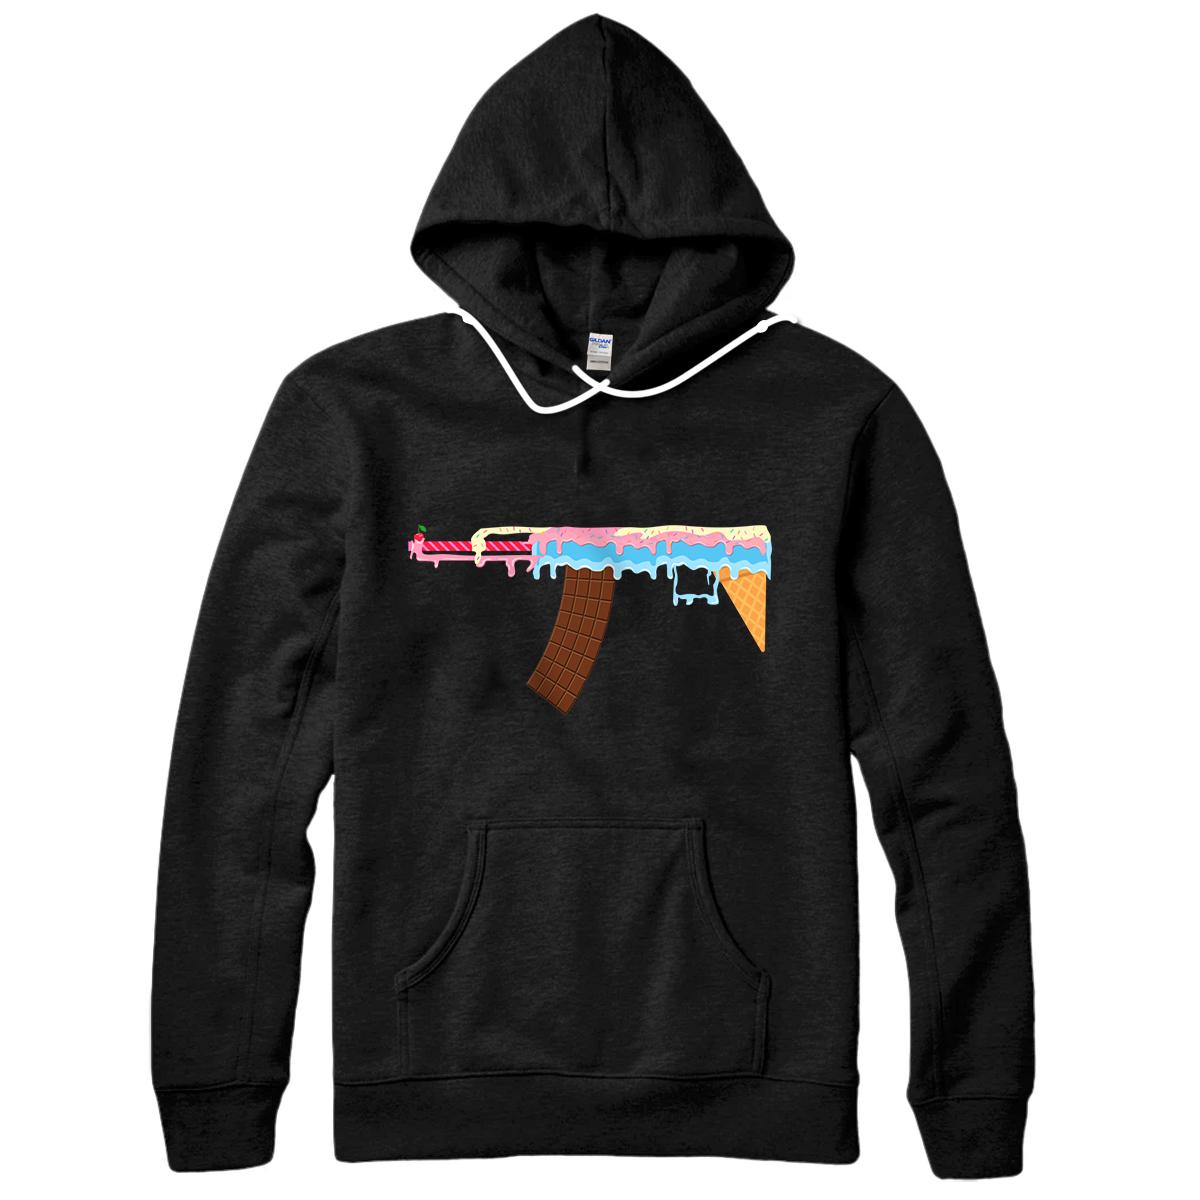 Personalized Ice Cream Gun Weapon Rifle Pullover Hoodie